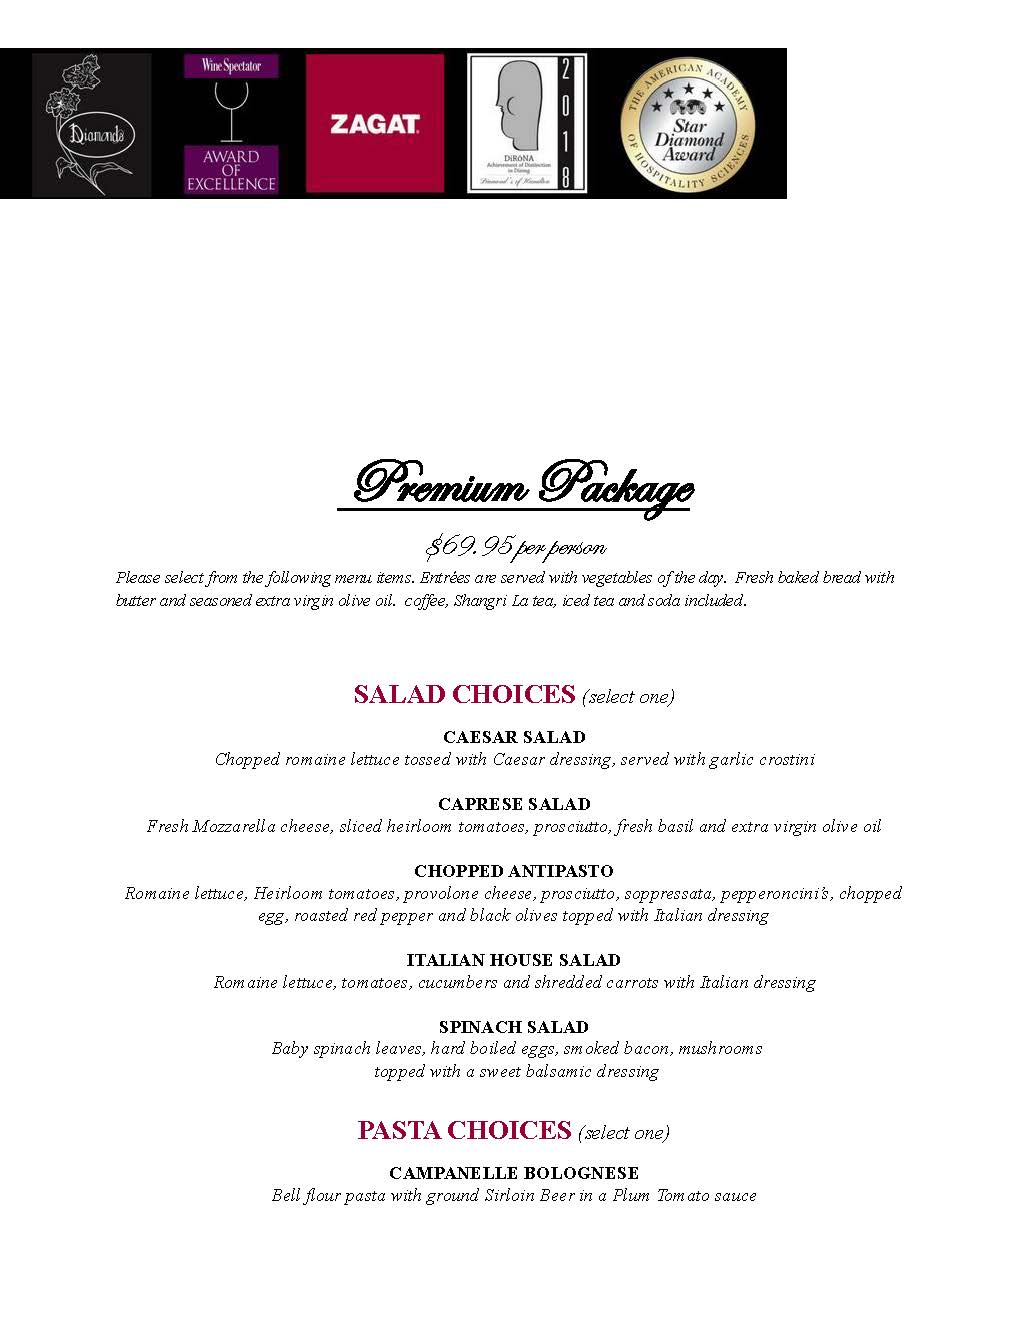 Menu page for the premium package at bianelli's restaurant, featuring award logos, and lists of salad, pasta, and bread options.